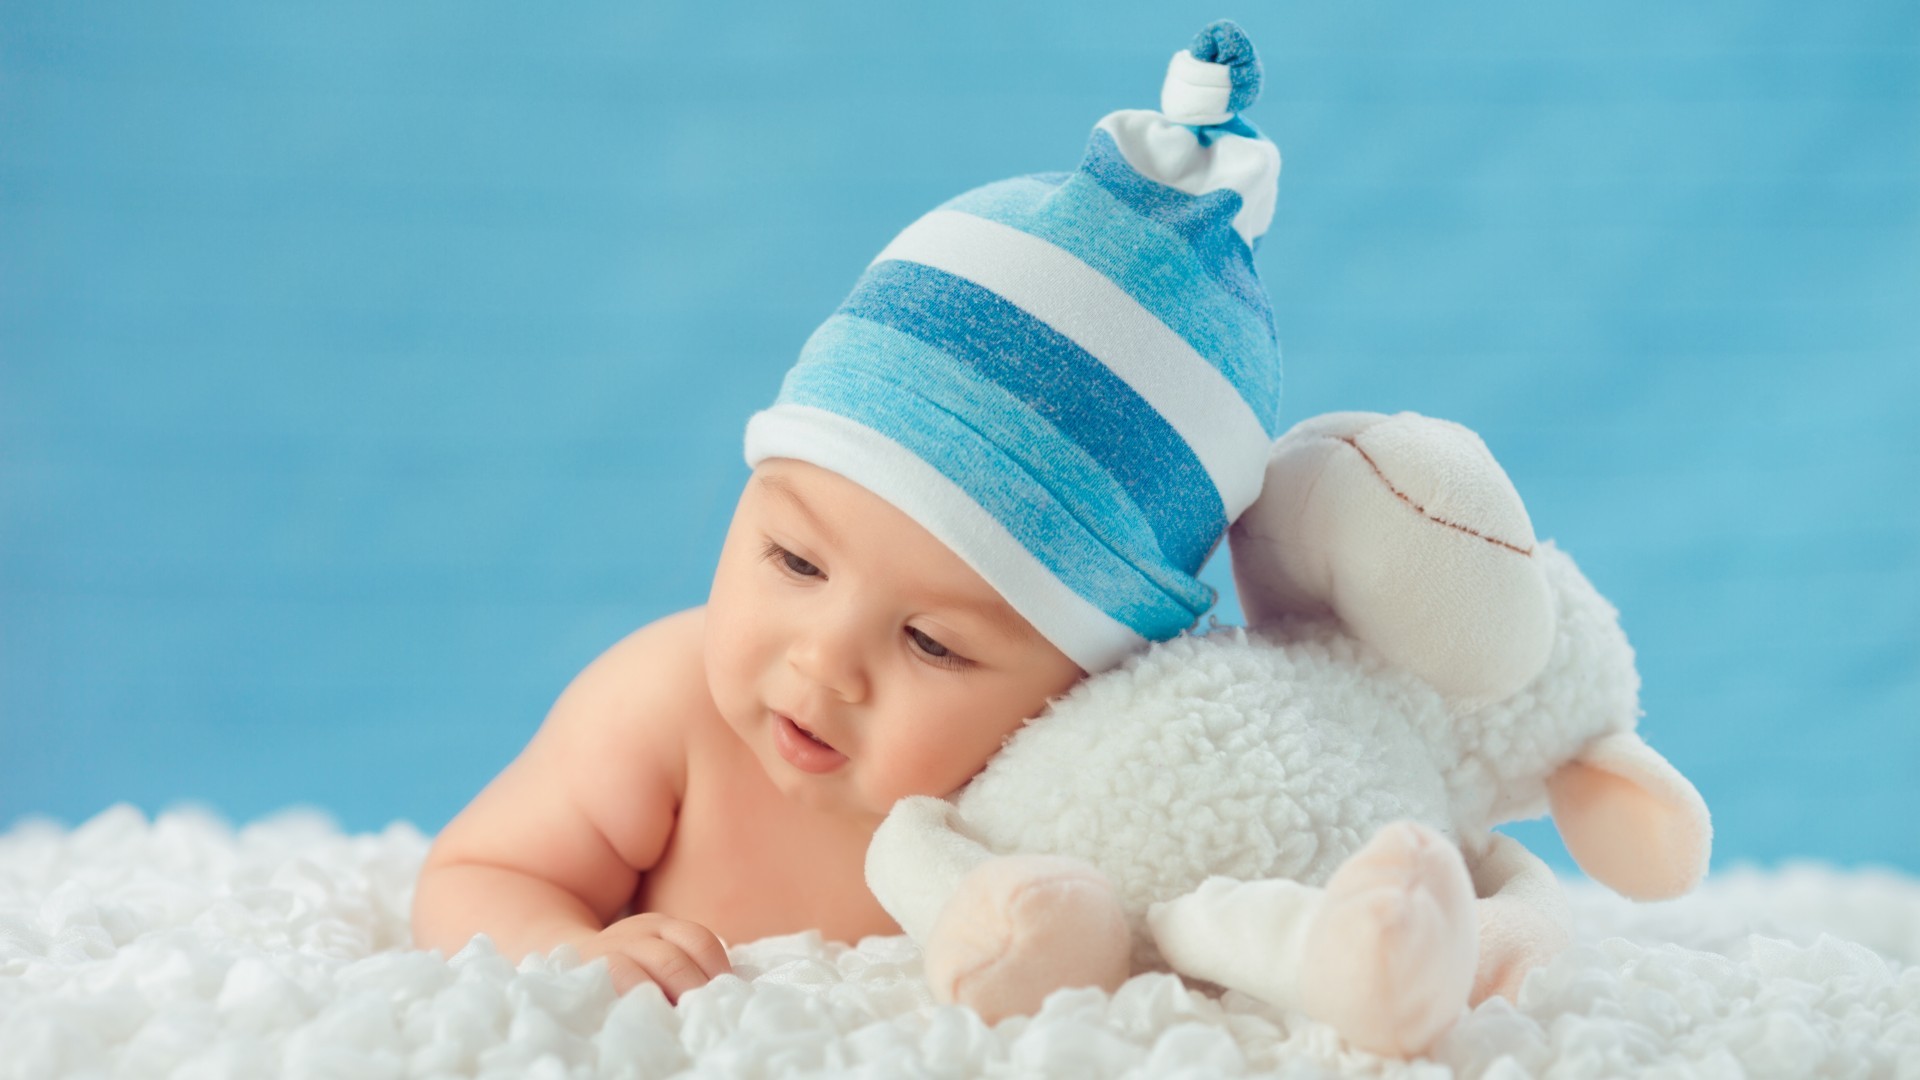 1920x1080 a baby boy lying on clouds with sheep toy cute boy wallpaper full hd free  download